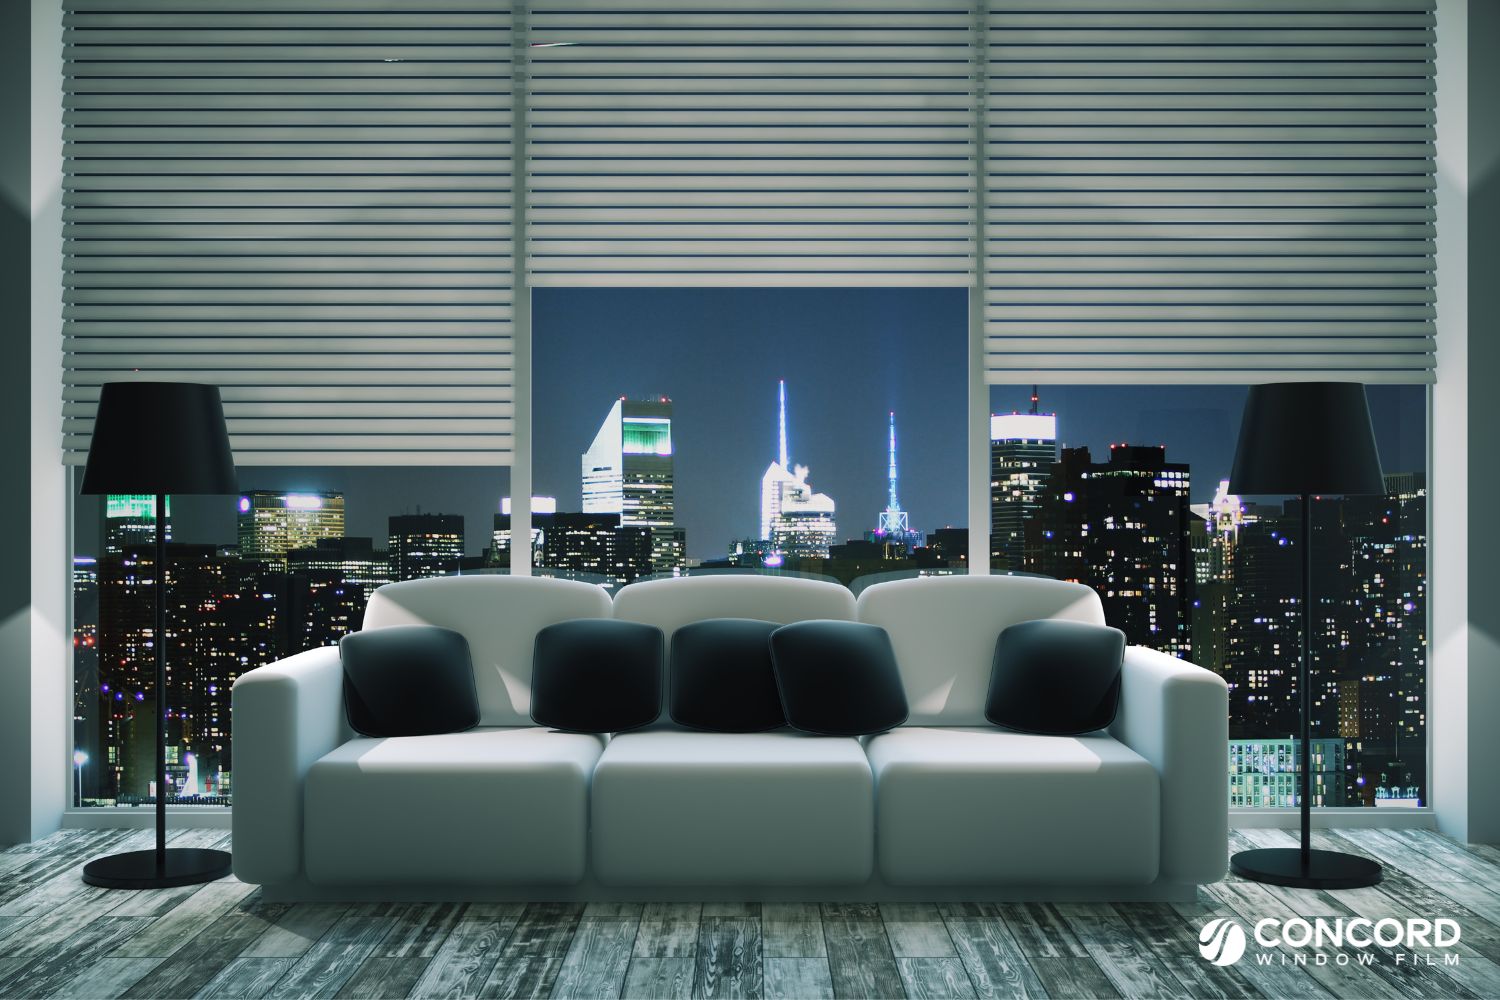 Photo of the inside of a window at night looking out onto the city clearly for a post on dual reflective window film